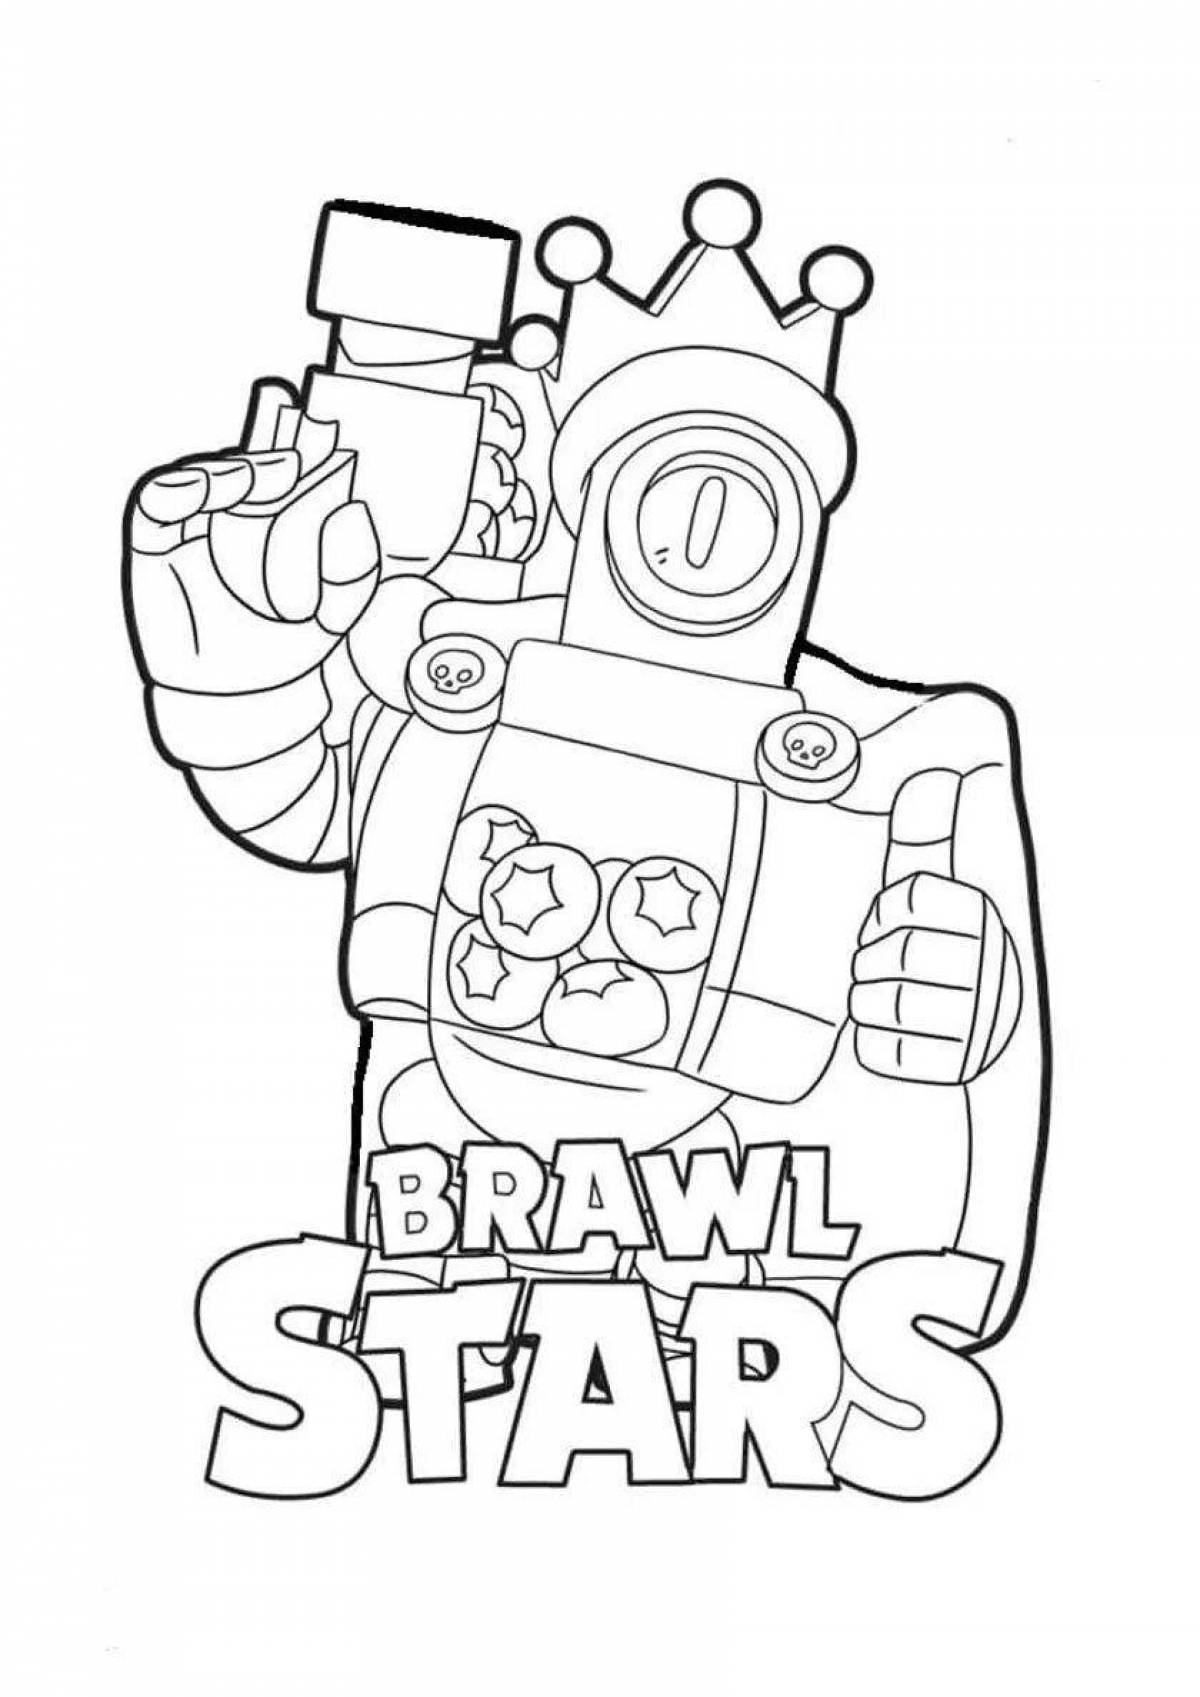 Amazing bravo stars coloring pages for 10 year old boys